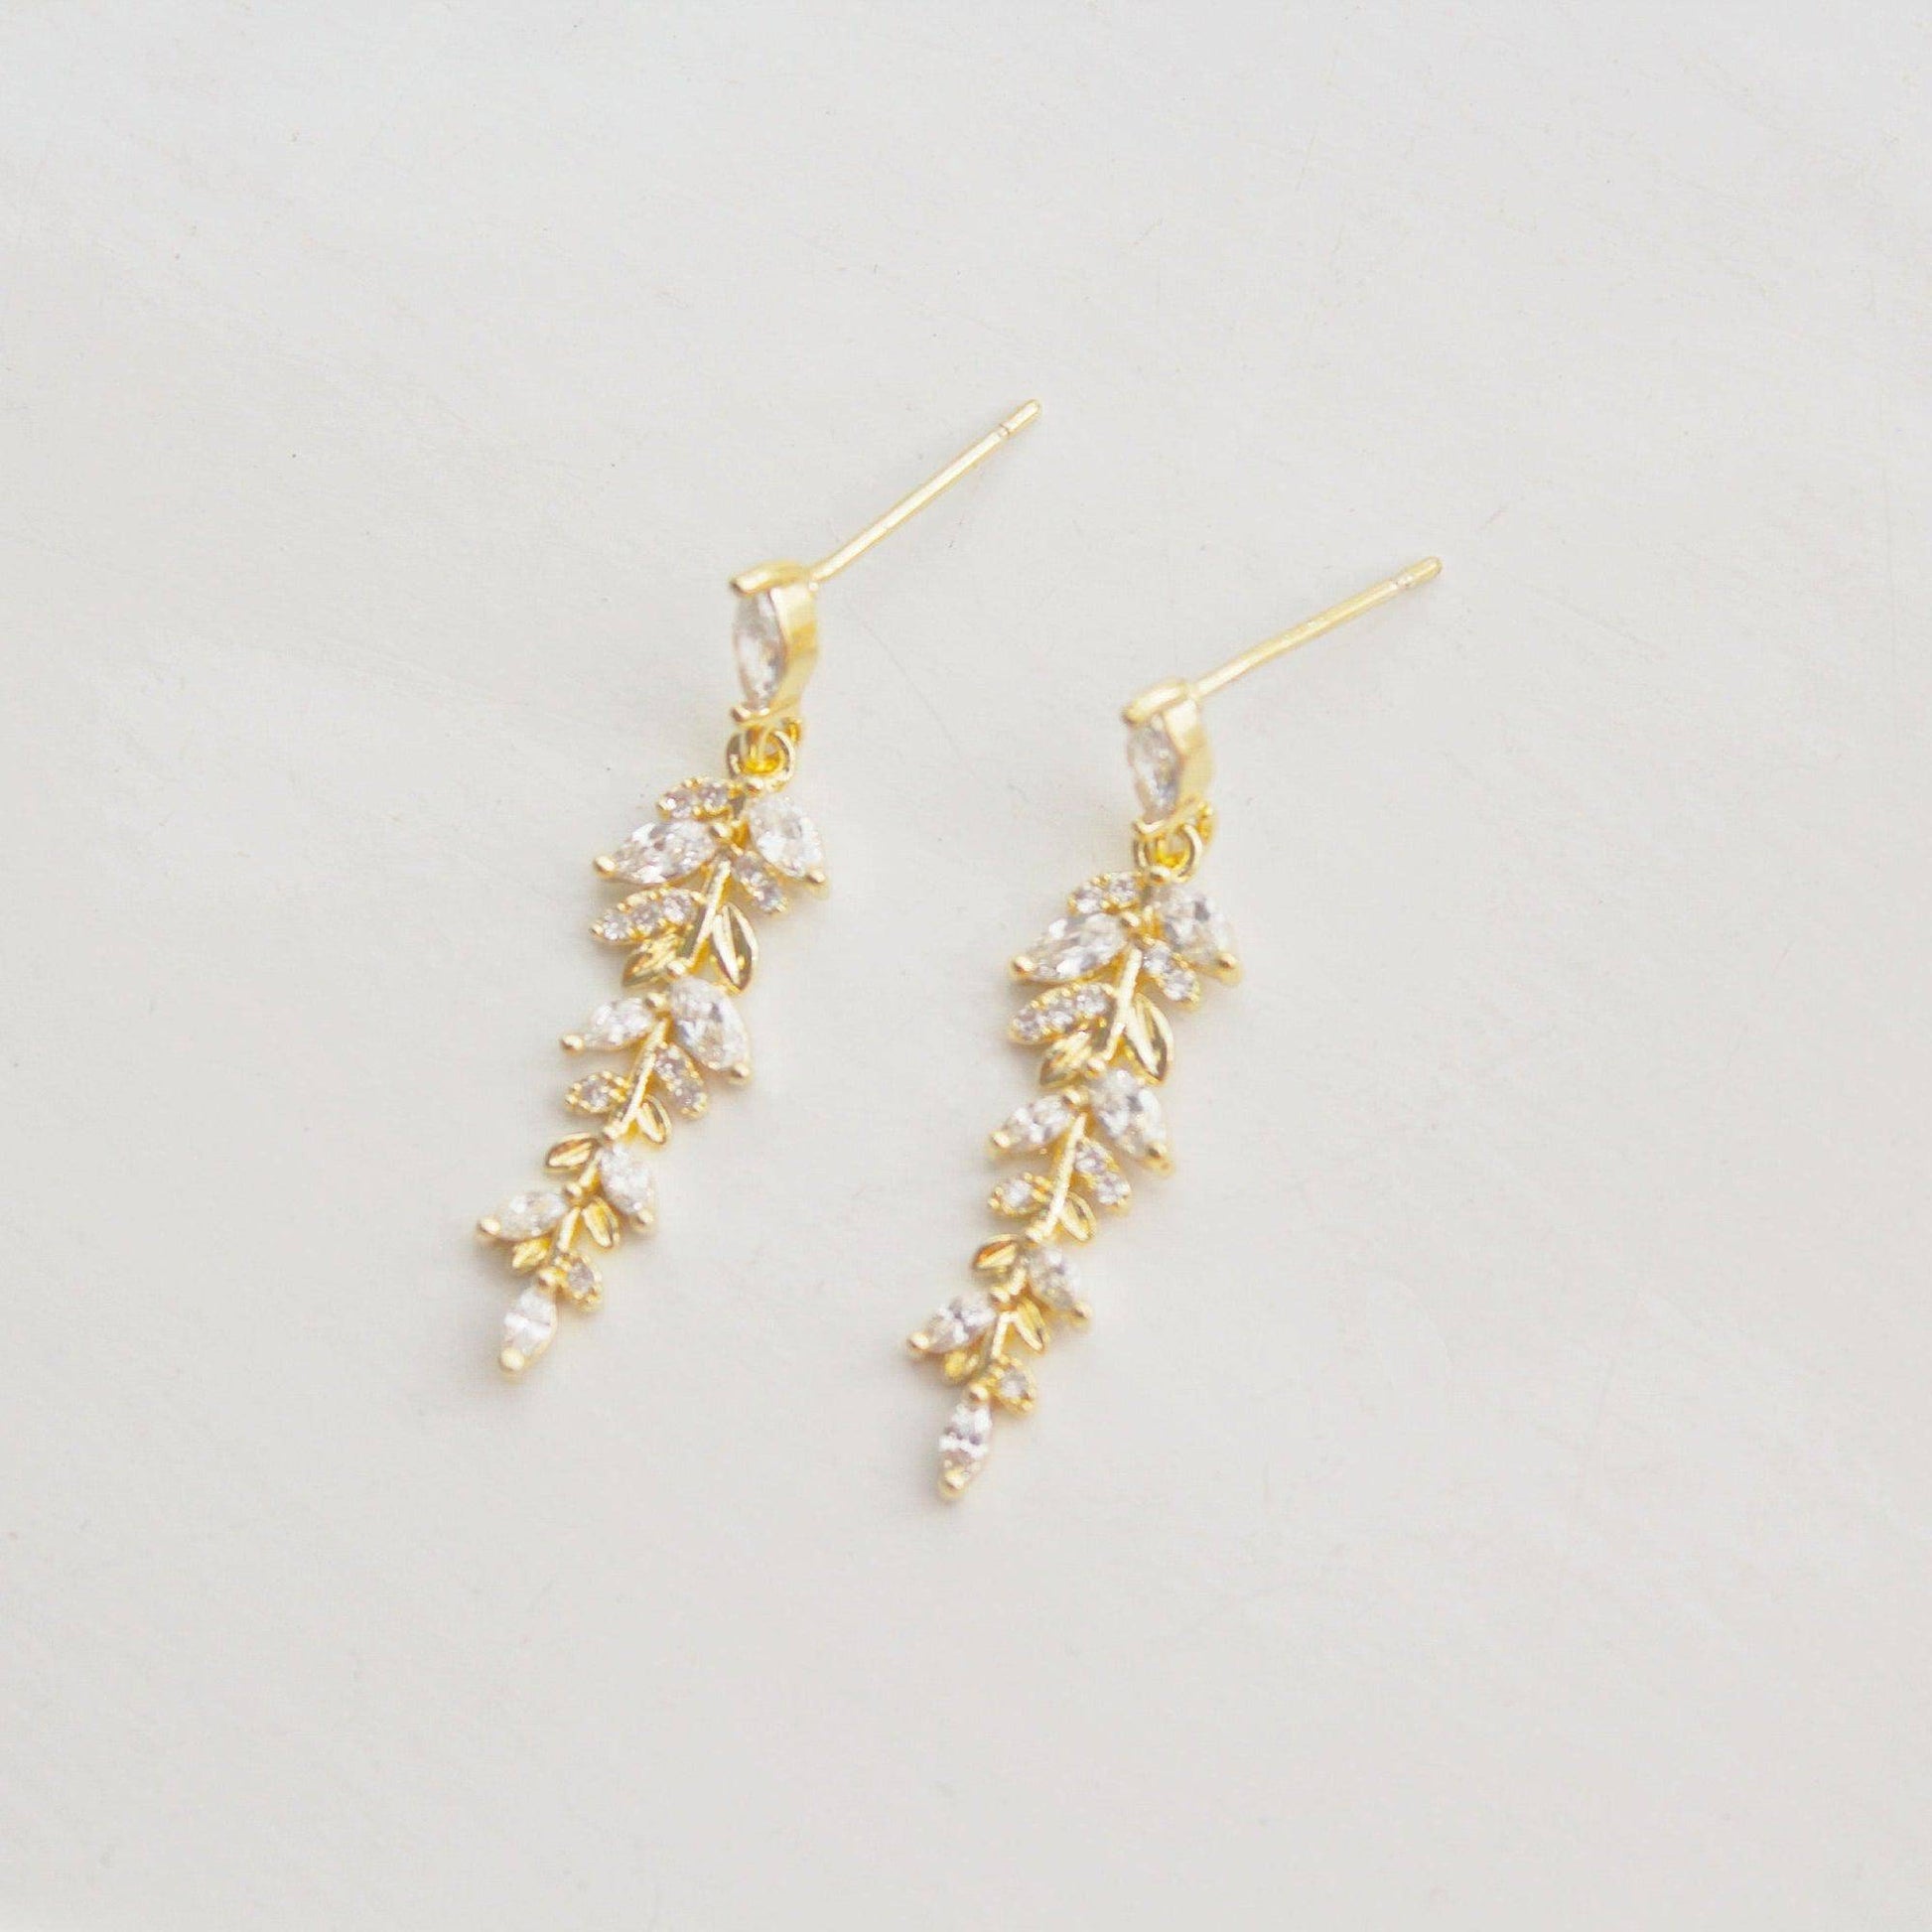 Willow Earrings - Gold and Crystal Leaf Dangle Drop Earrings-Ninaouity